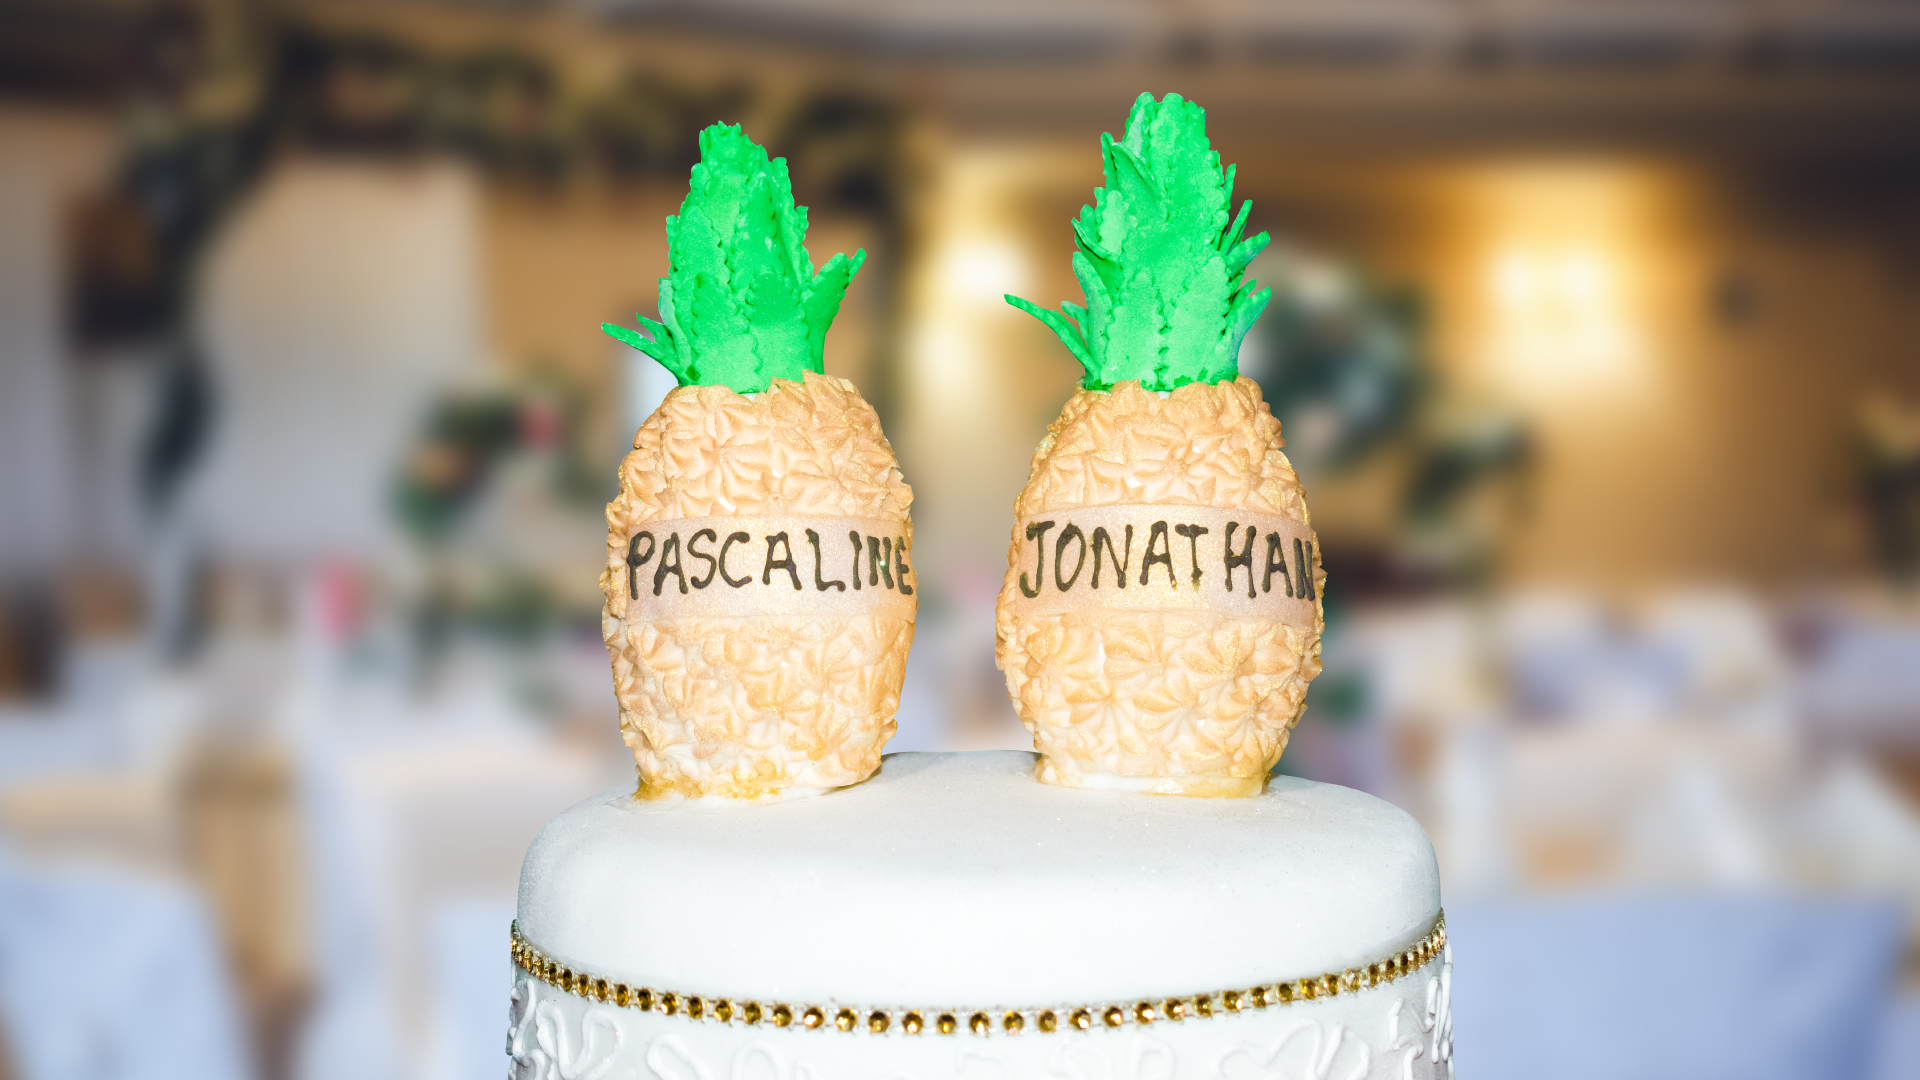 Pineapple Sculpture as Cake Topping